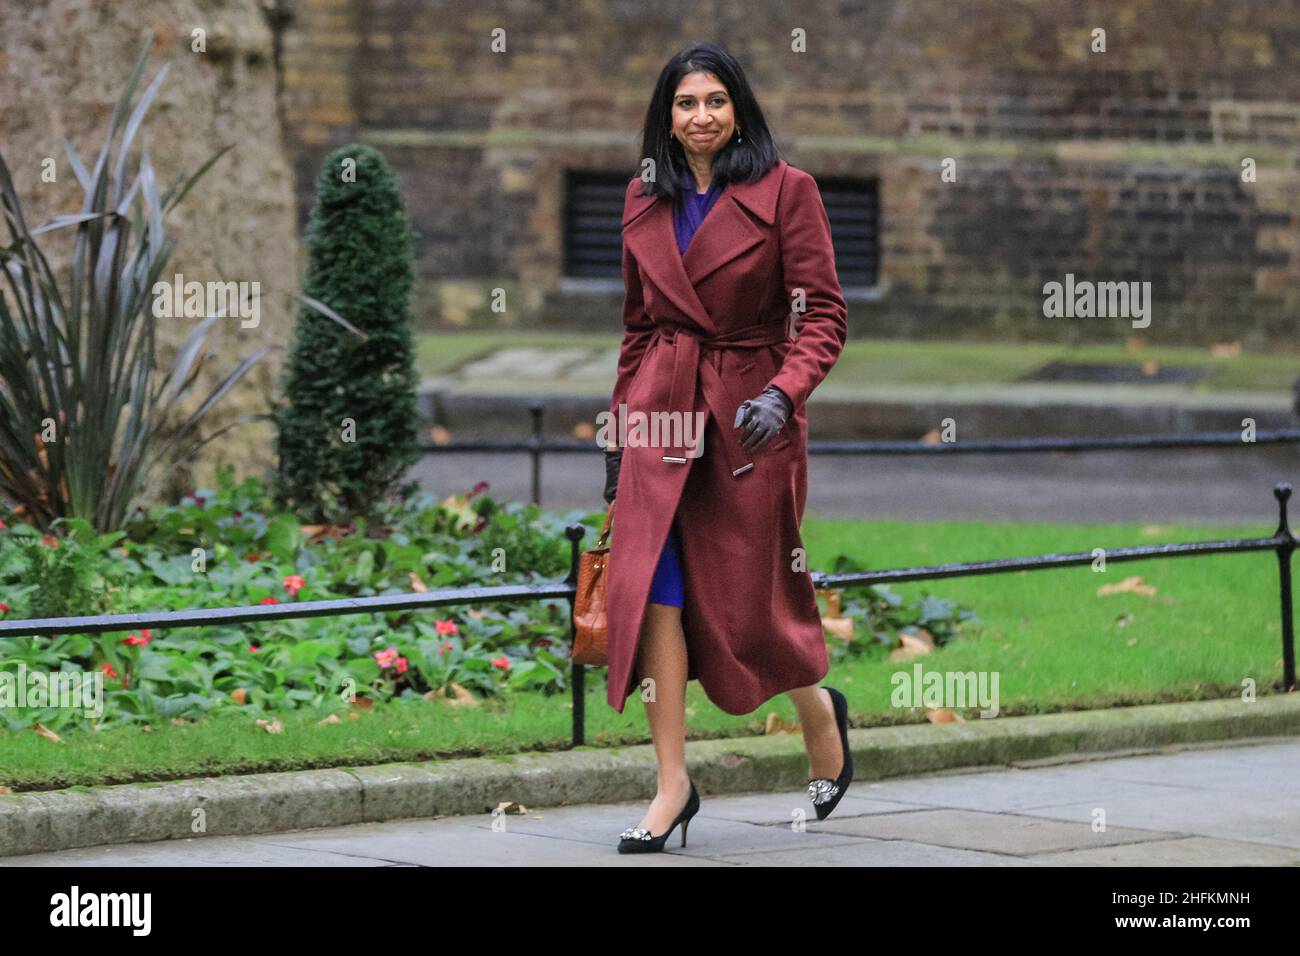 Suella Braverman QC MP, Attorney General, British Conservative Party politician, smiles in Downing Street, London Stock Photo